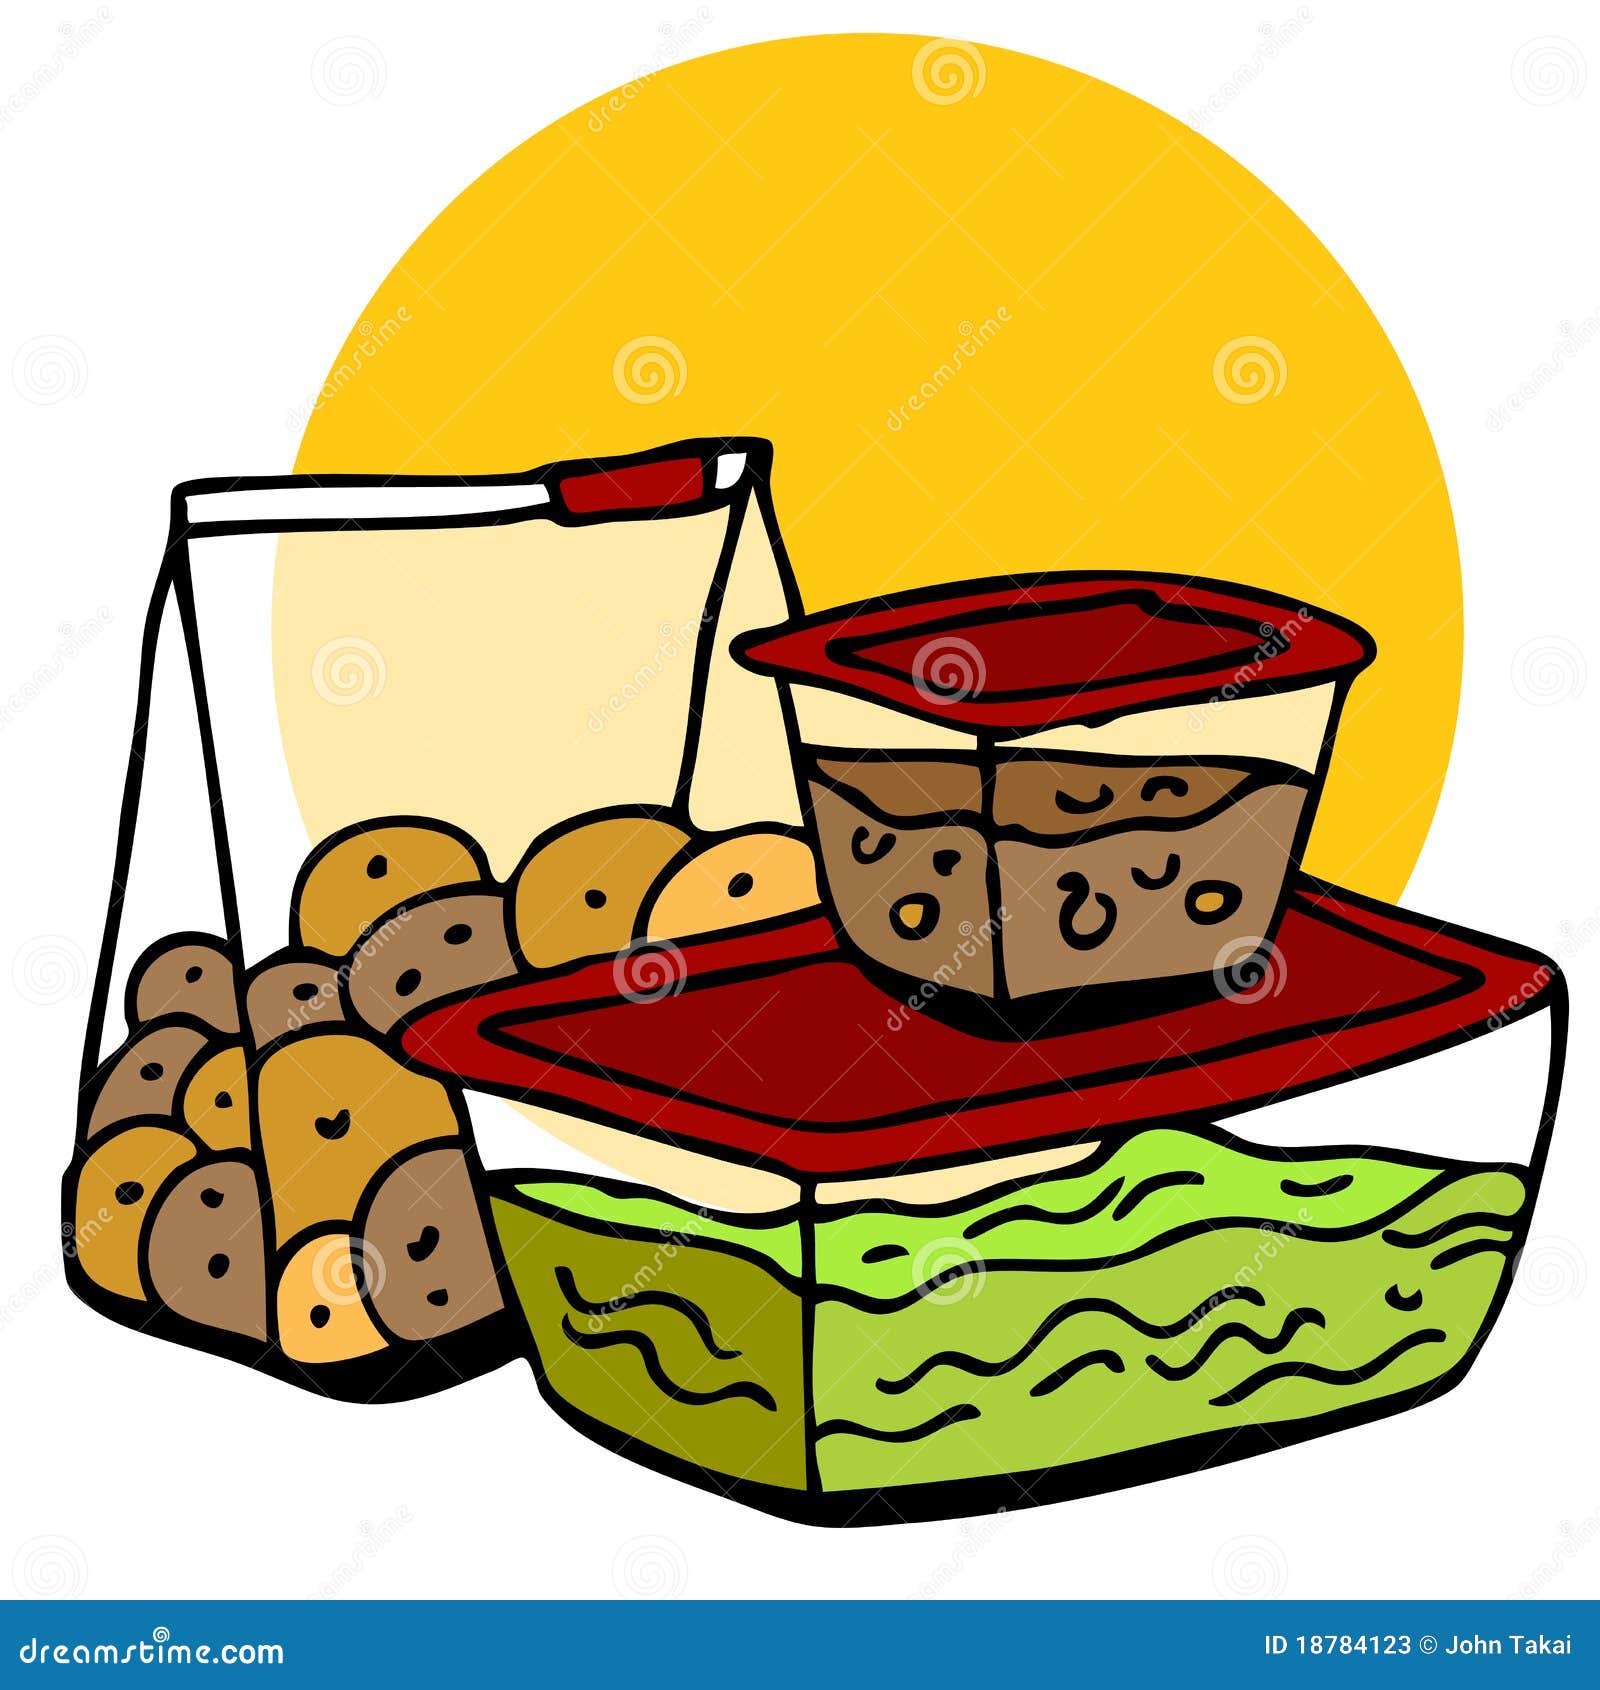 Leftovers Containers: Over 786 Royalty-Free Licensable Stock Vectors &  Vector Art